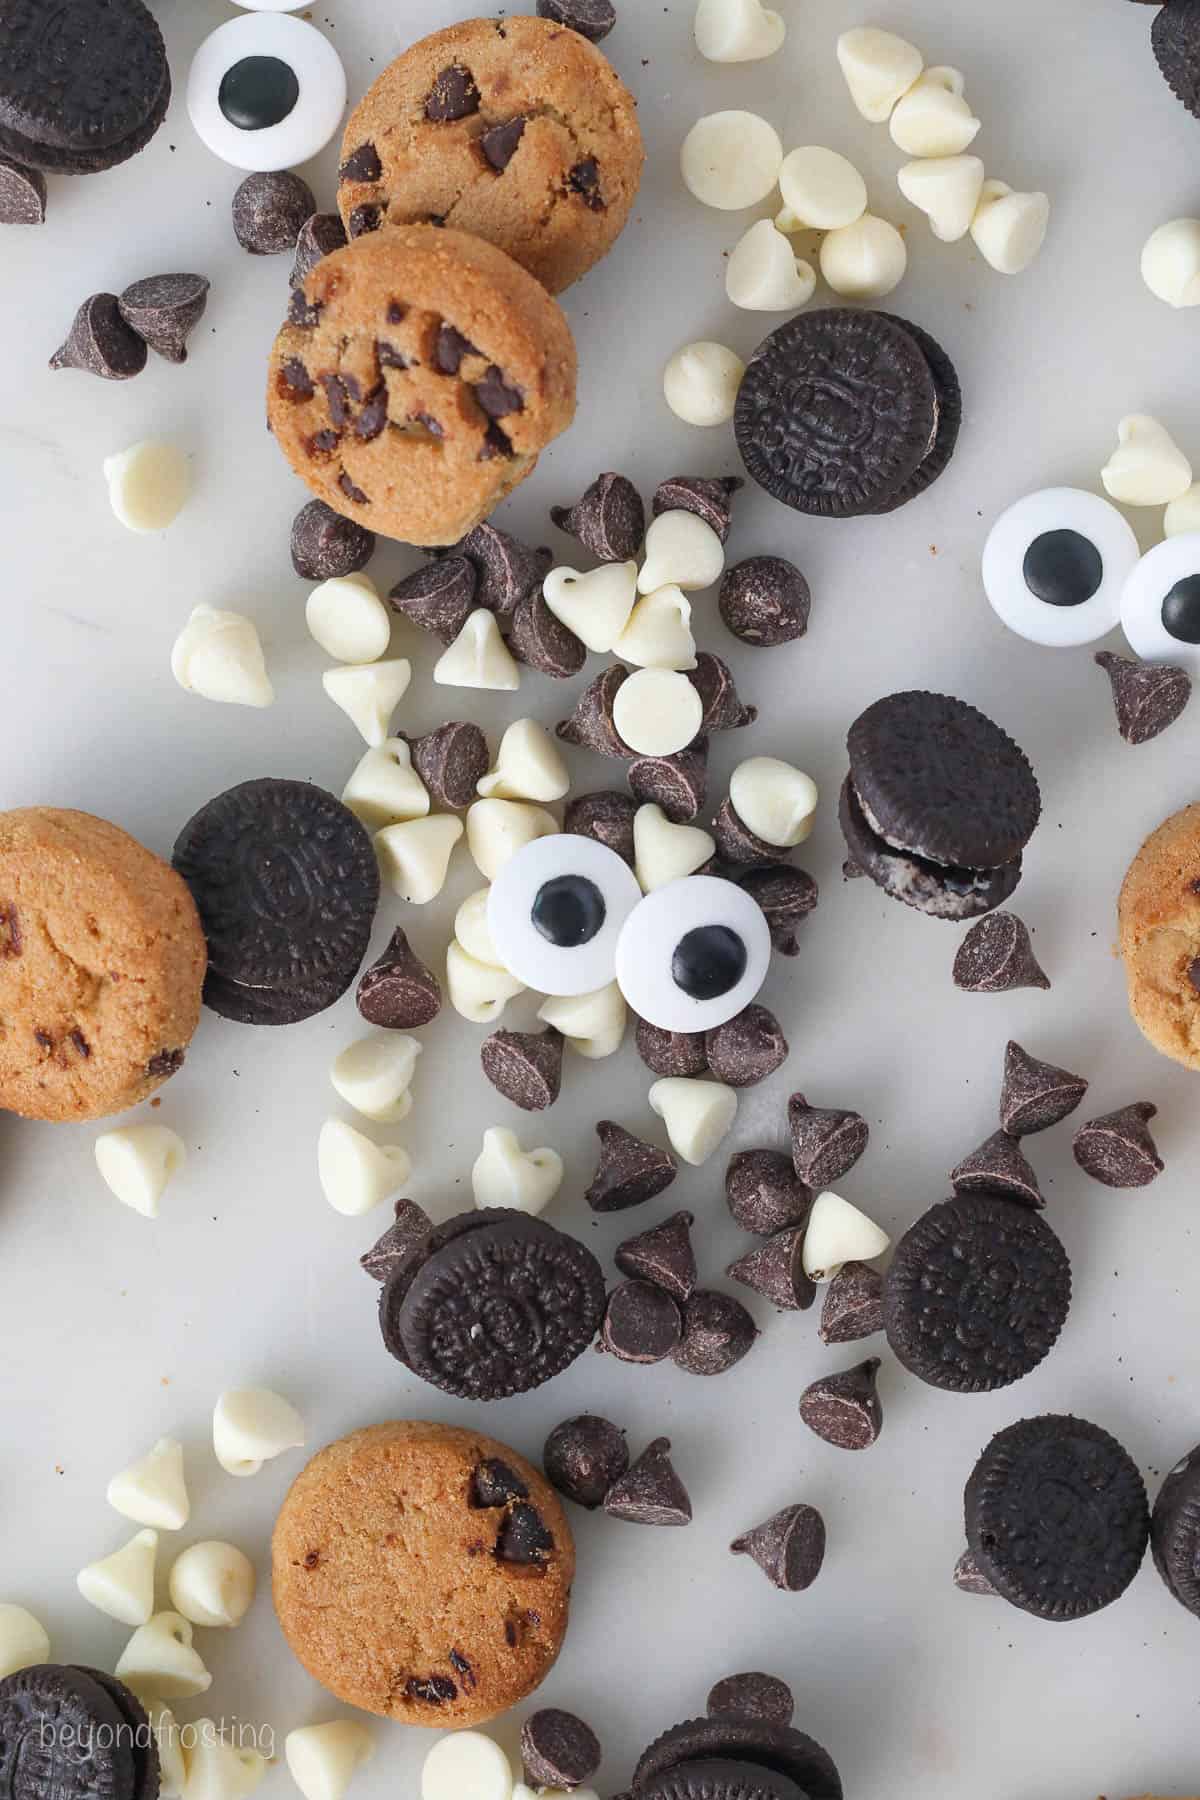 Overhead view of mini Oreos, mini Chips Ahoy cookies, white chocolate chips, chocolate chips, and candy eyes scattered on a white countertop.